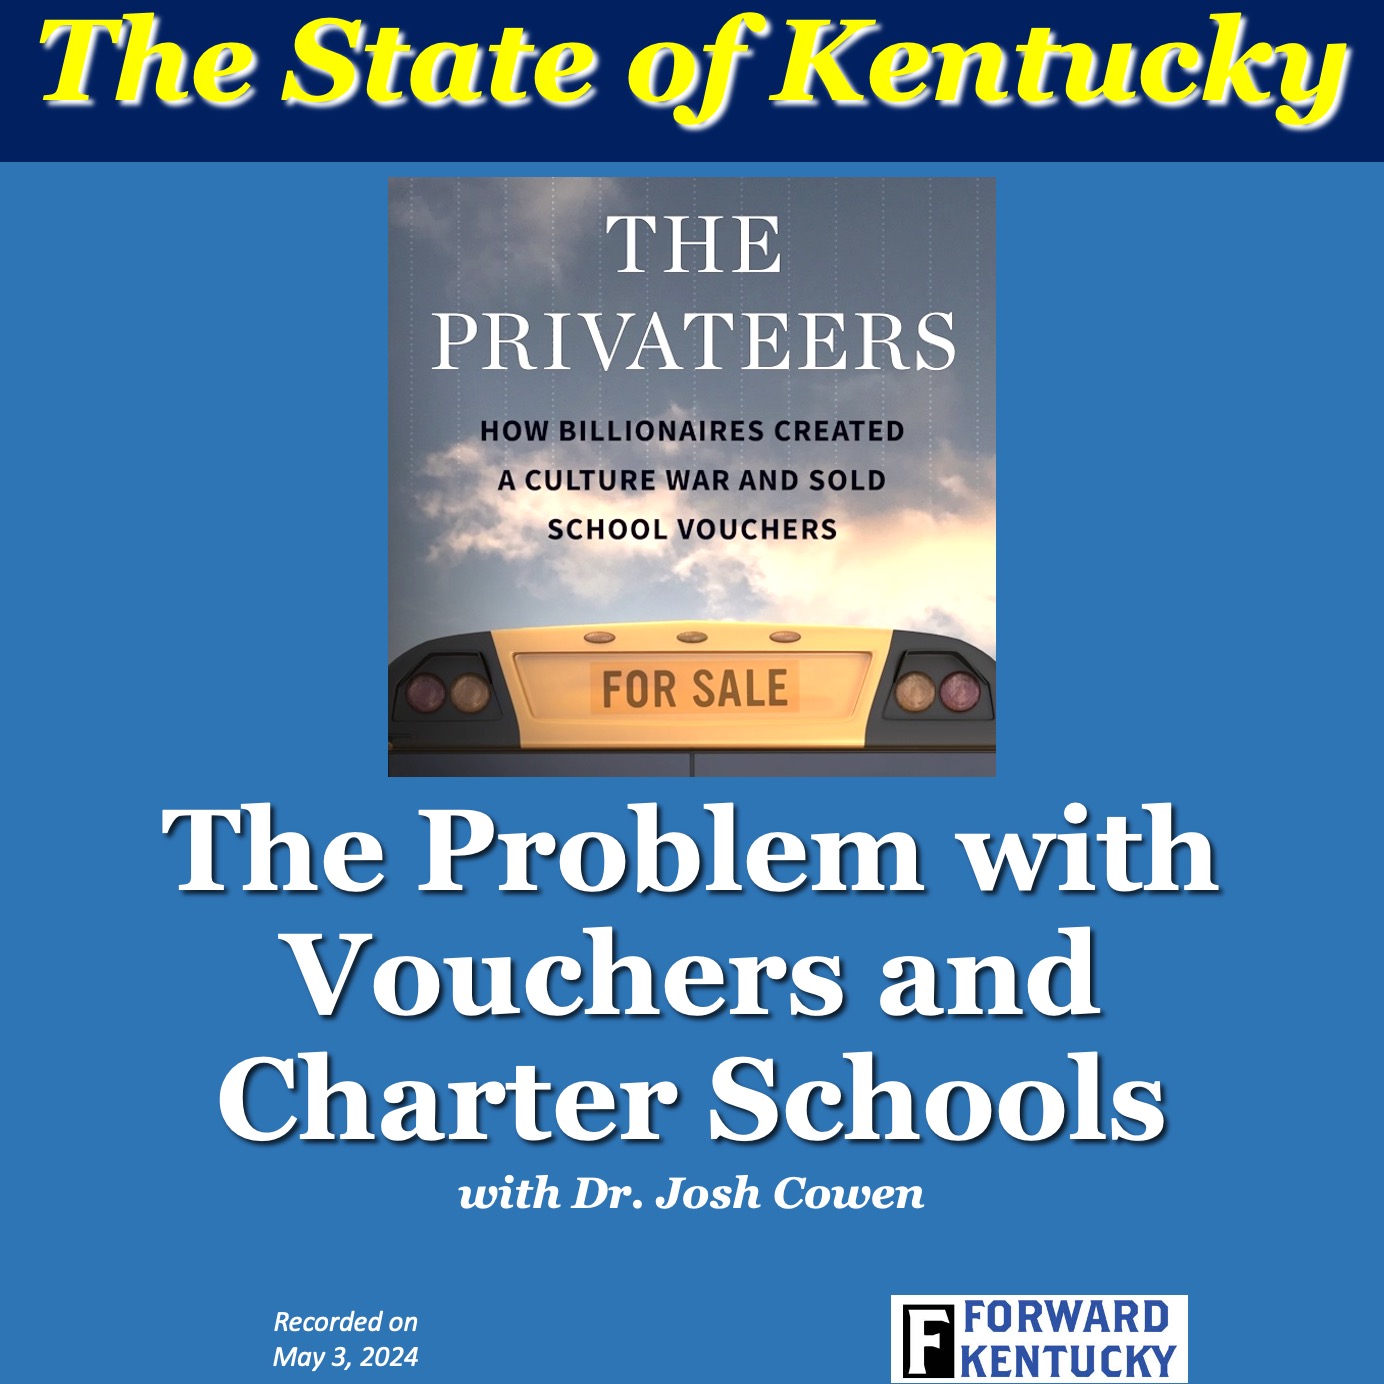 The Problem with Vouchers and Charter Schools